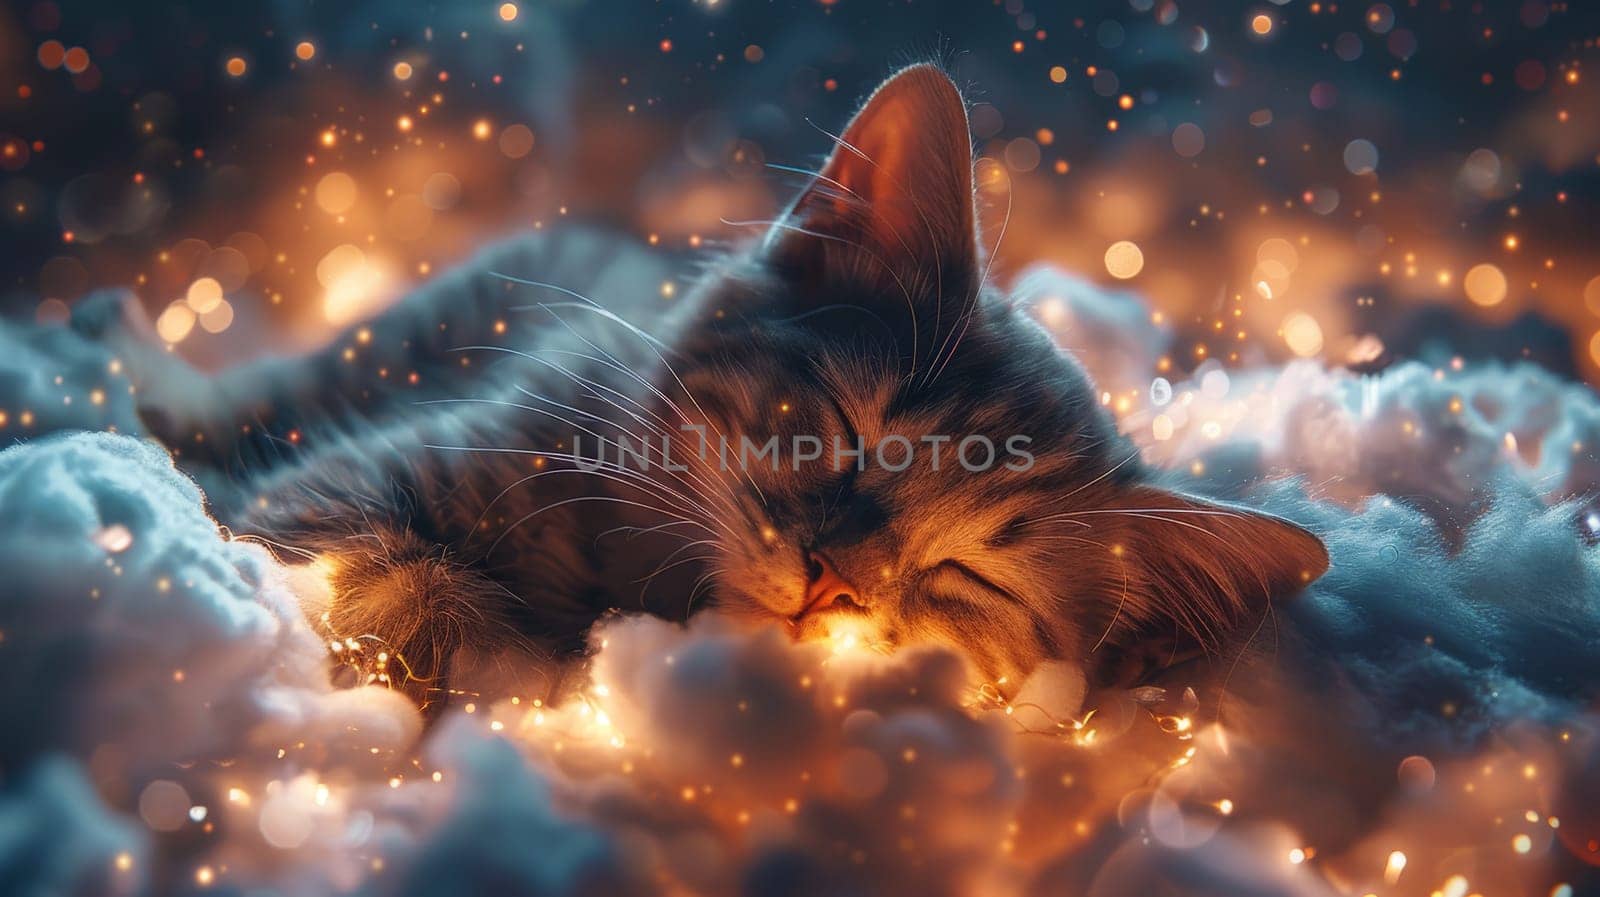 A cat lying down on the clouds, flying over a city in a starry magic night.